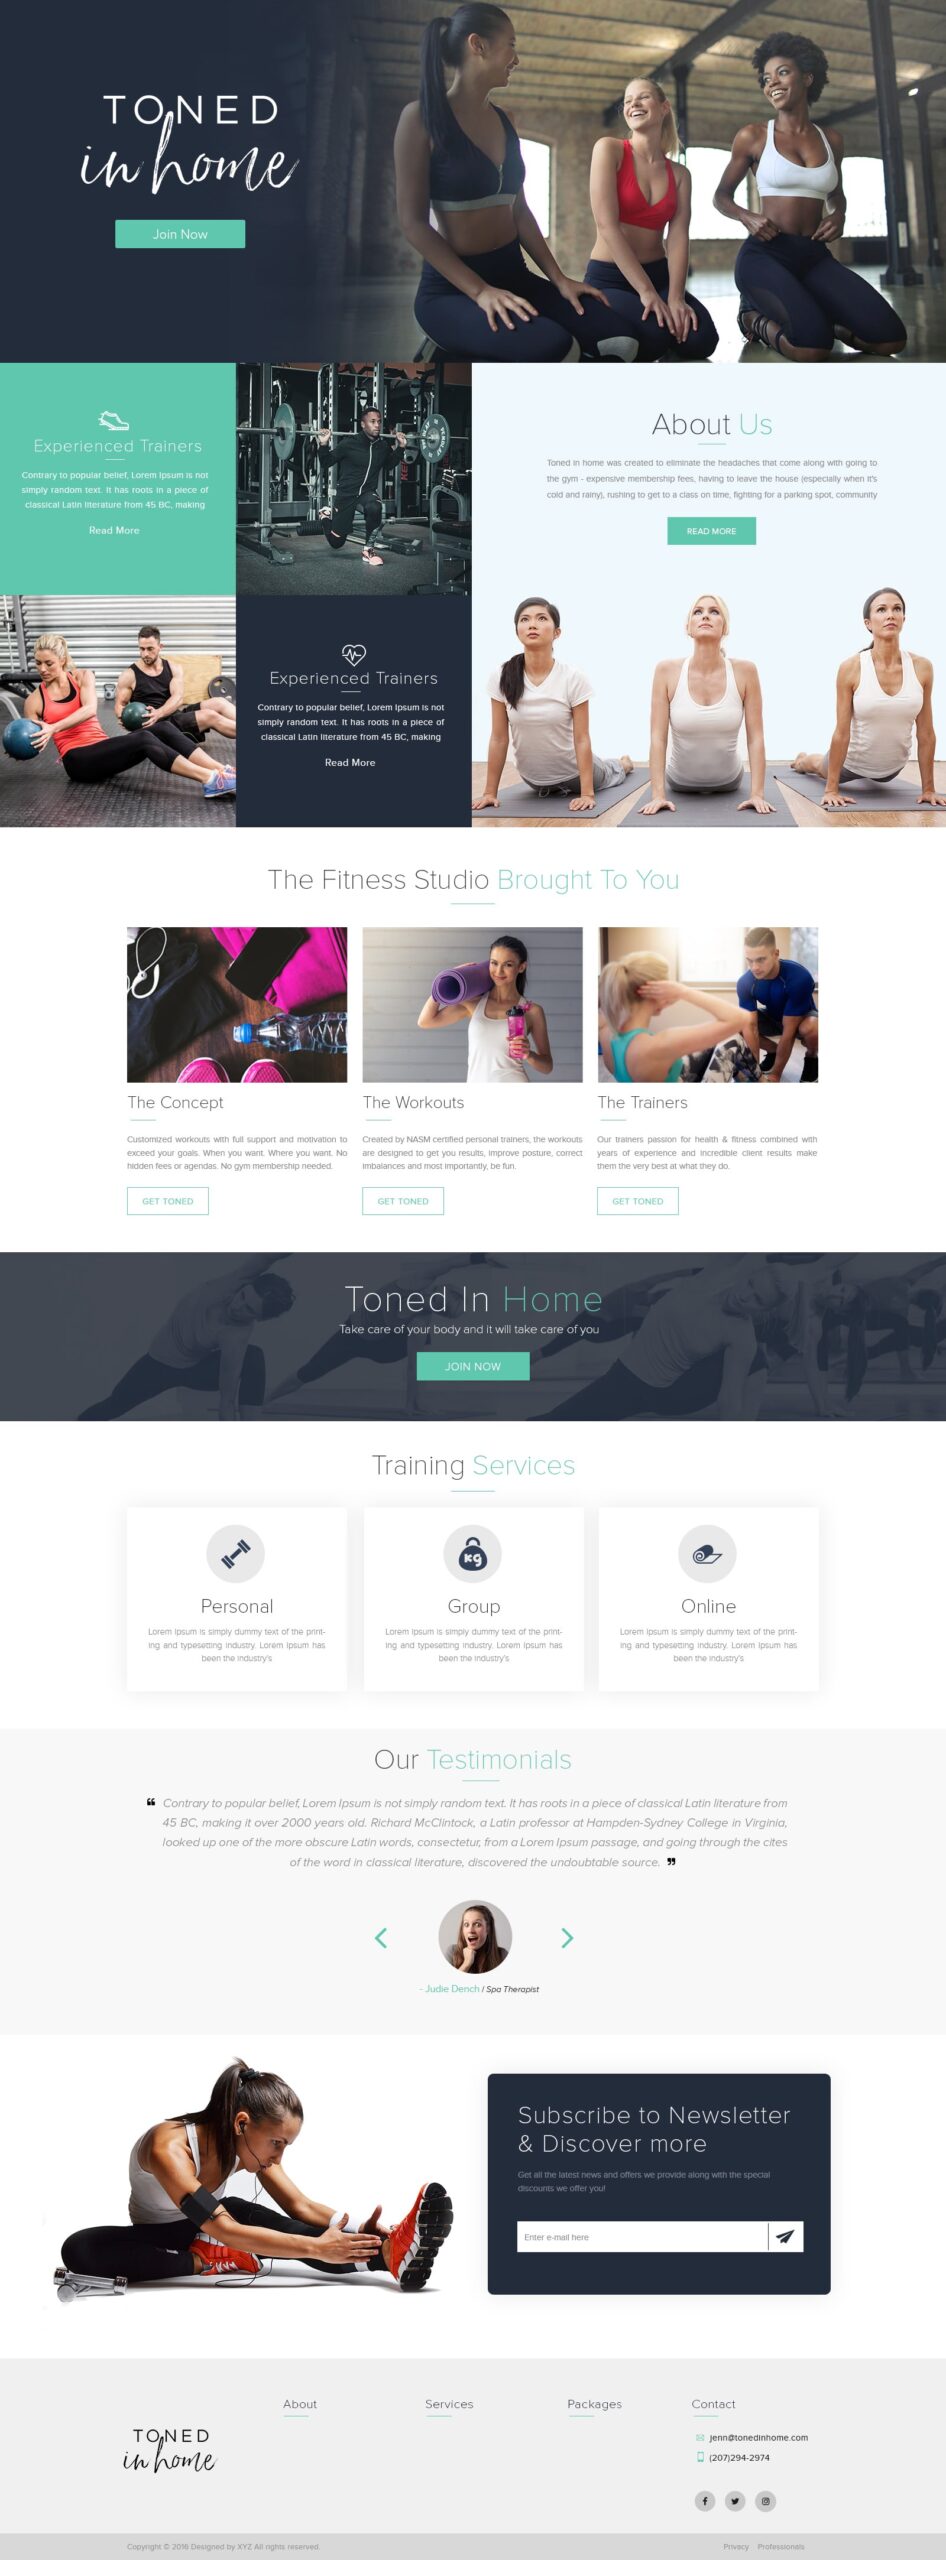 Toned in Home-min Landing Page